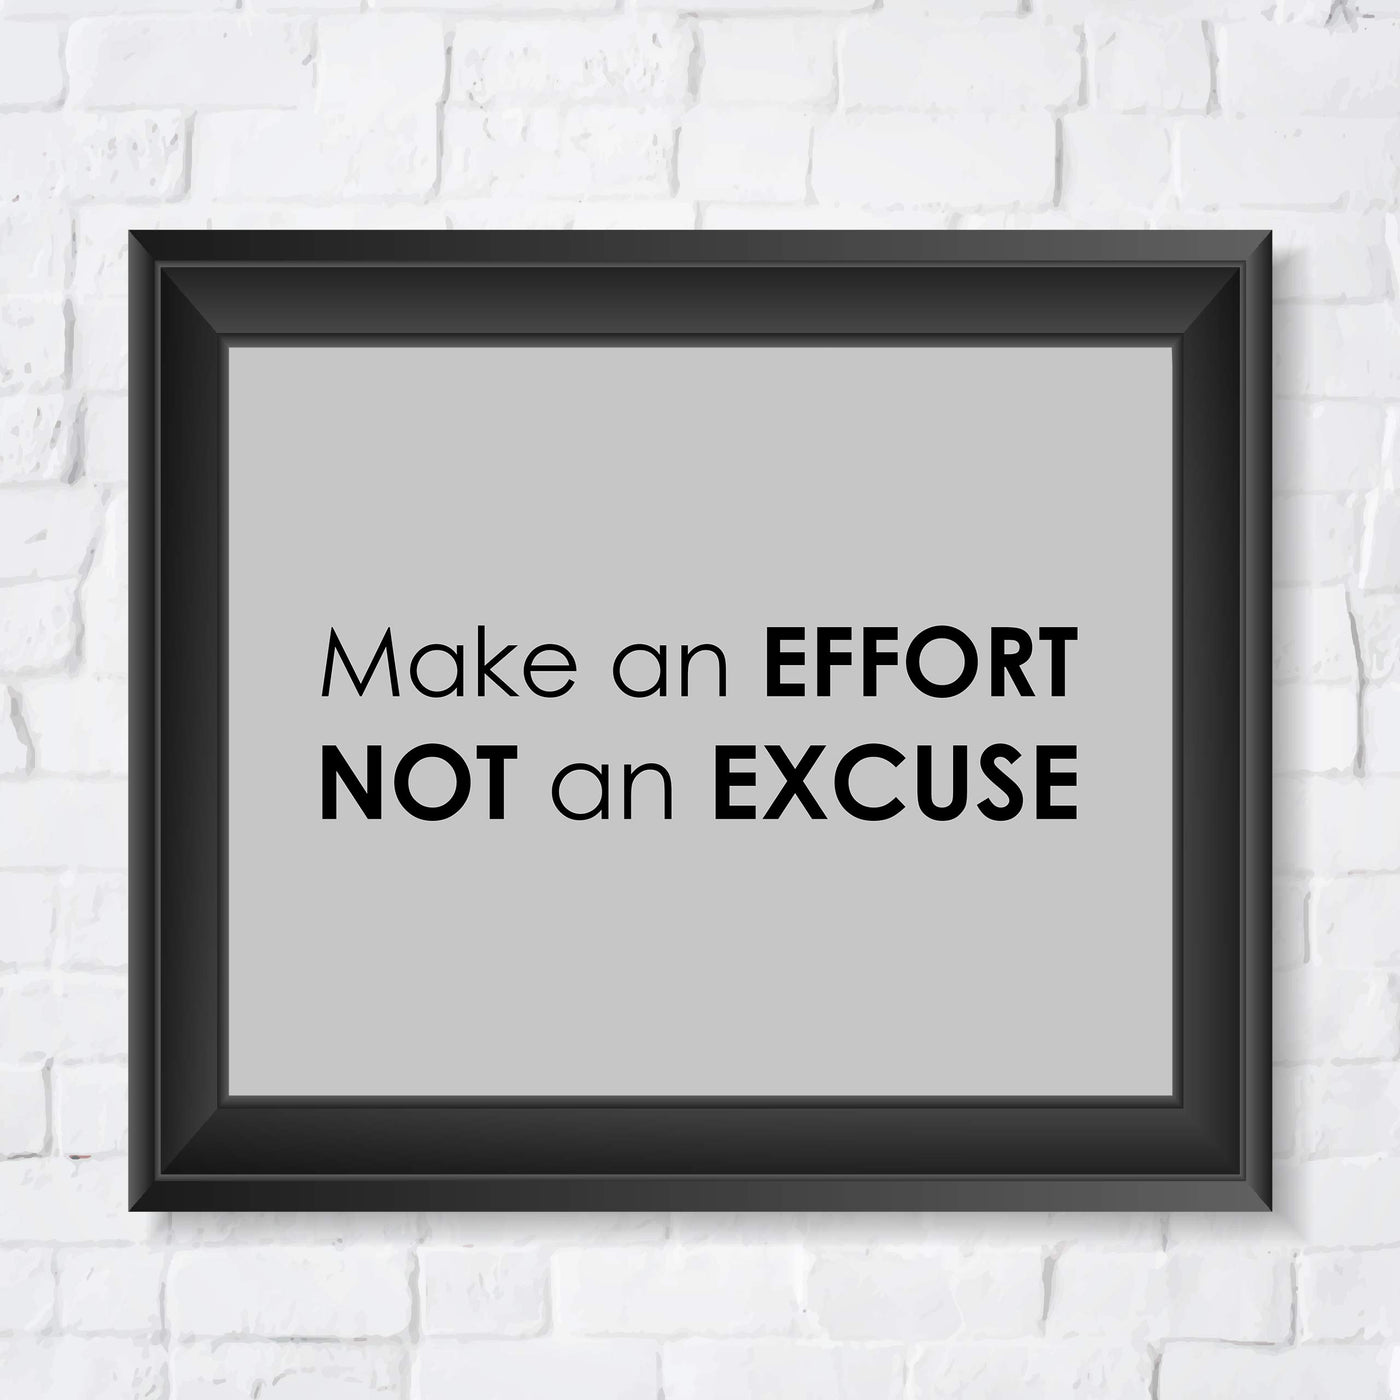 ?Make An Effort, Not An Excuse? Motivational Wall Art -10 x 8" Modern Typographic Poster Print-Ready to Frame. Inspirational Decor for Home-Office-School-Dorm-Gym. Perfect Sign for Motivation!